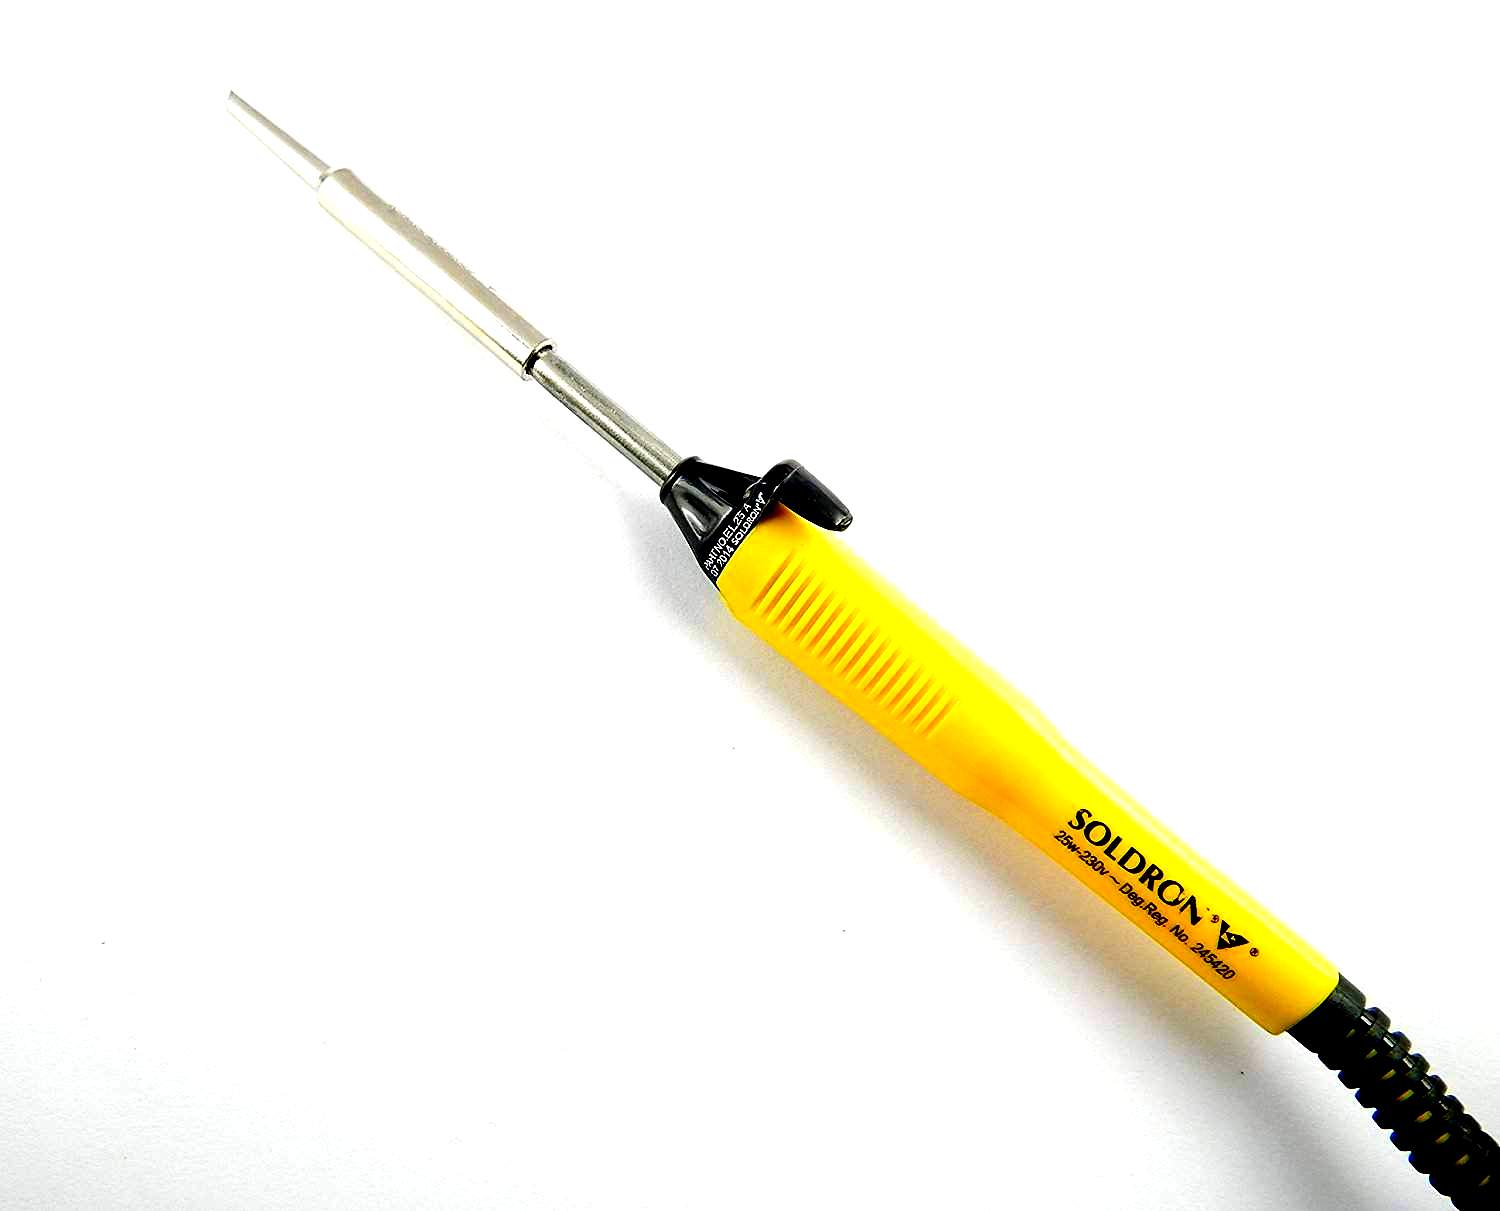 Buy Soldron High-Quality 25 Watts/230Volts Soldering Iron Online at